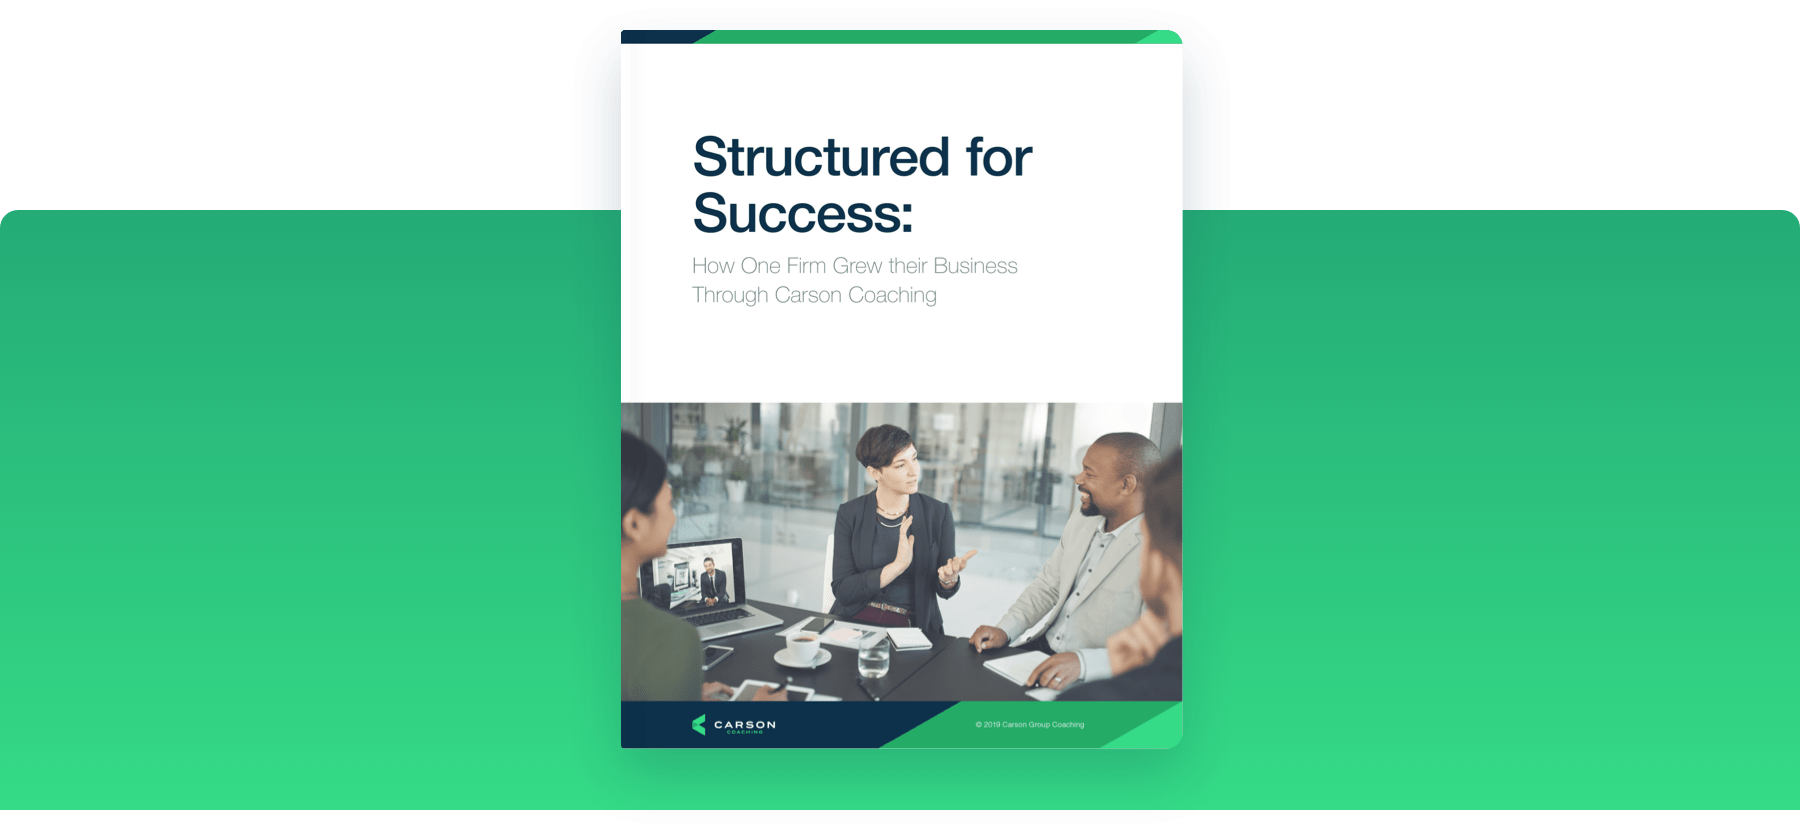 Structured for Success